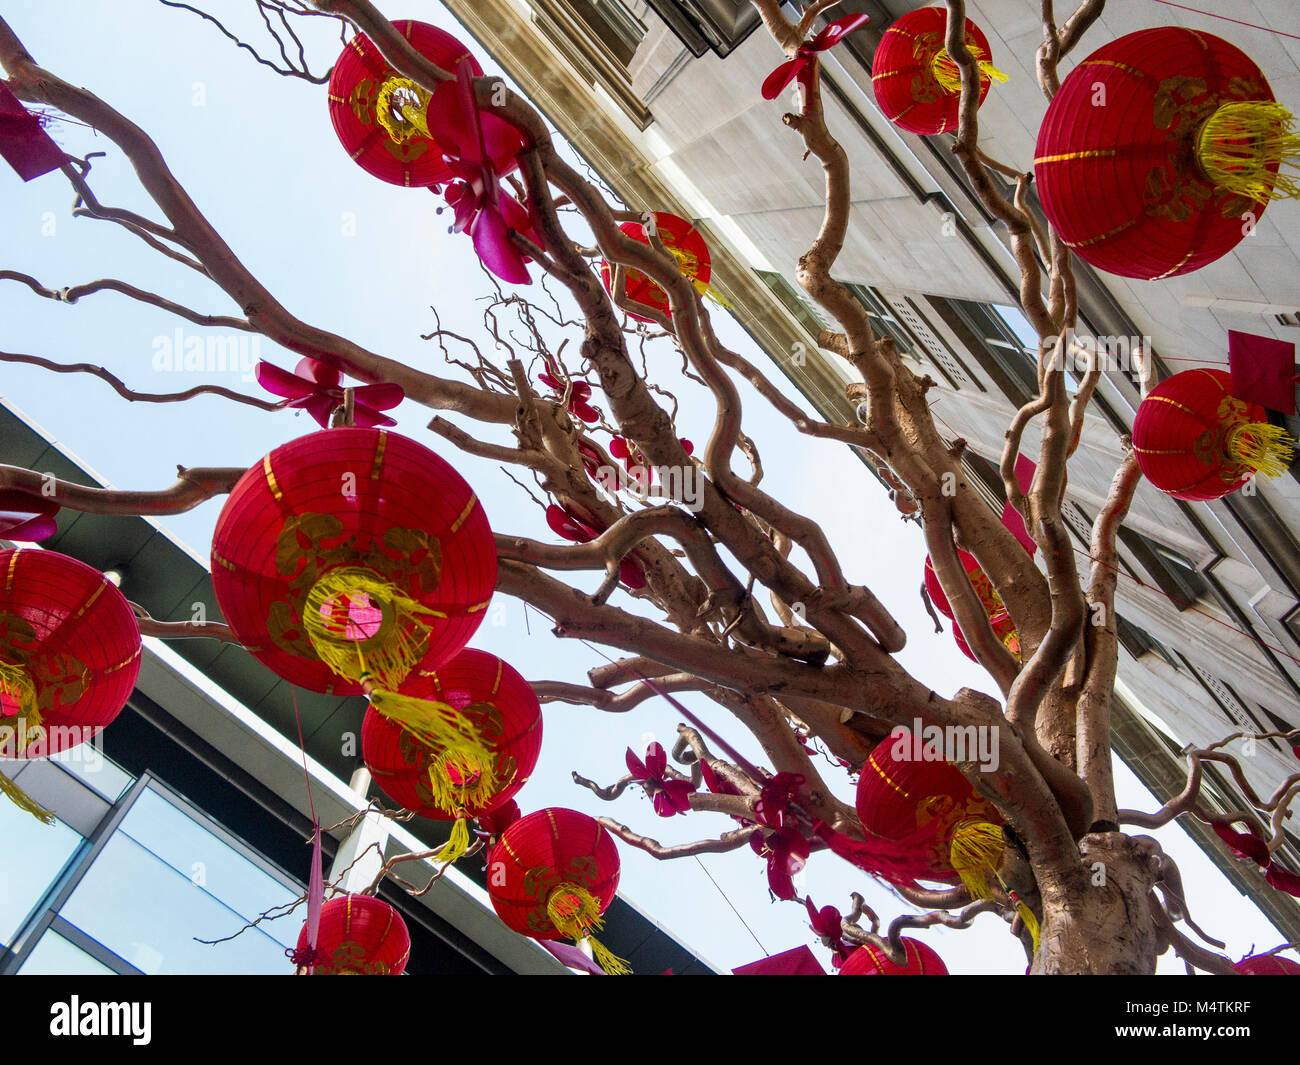 Chinese Lanterns on display in large bonsai style wishing tree in Regent Street with red envelopes for good luck Stock Photo